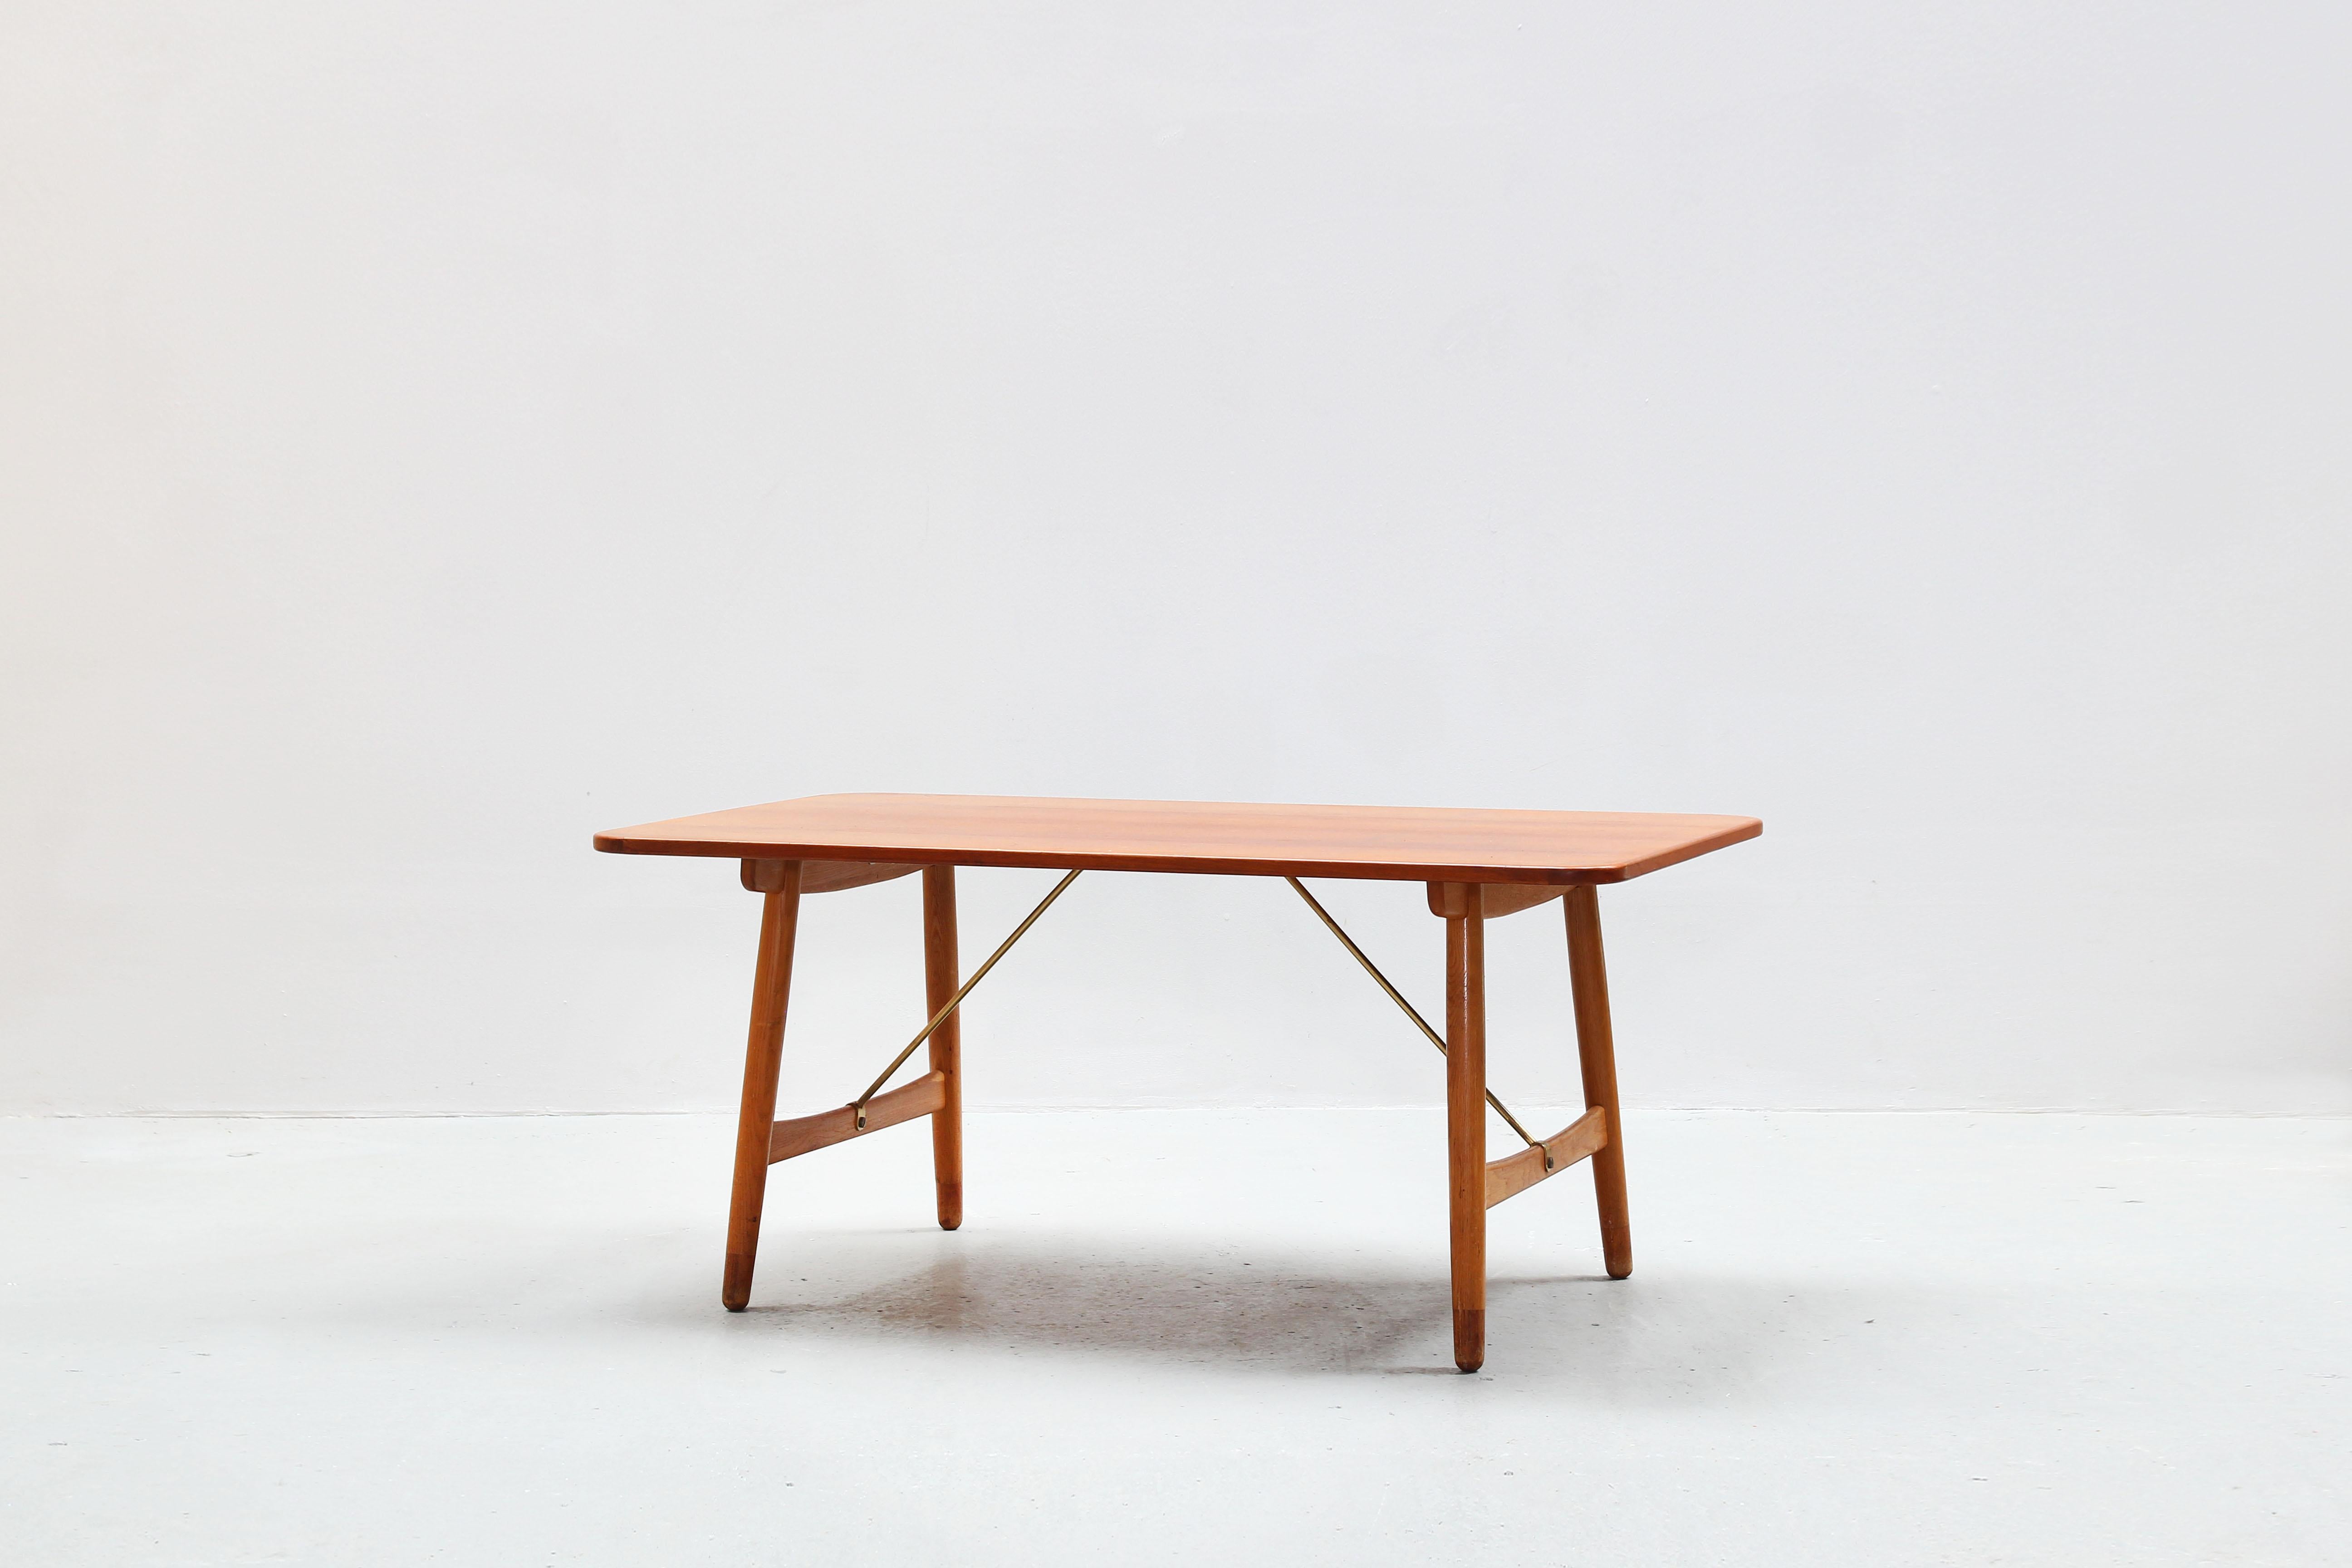 Very beautiful dining table designed by Børge Mogensen and produced by Søborg Mobler, made in Denmark, 1952.
The table is in a very good condition with little traces of usage and comes with a oak frame and with a table top made out of teak.